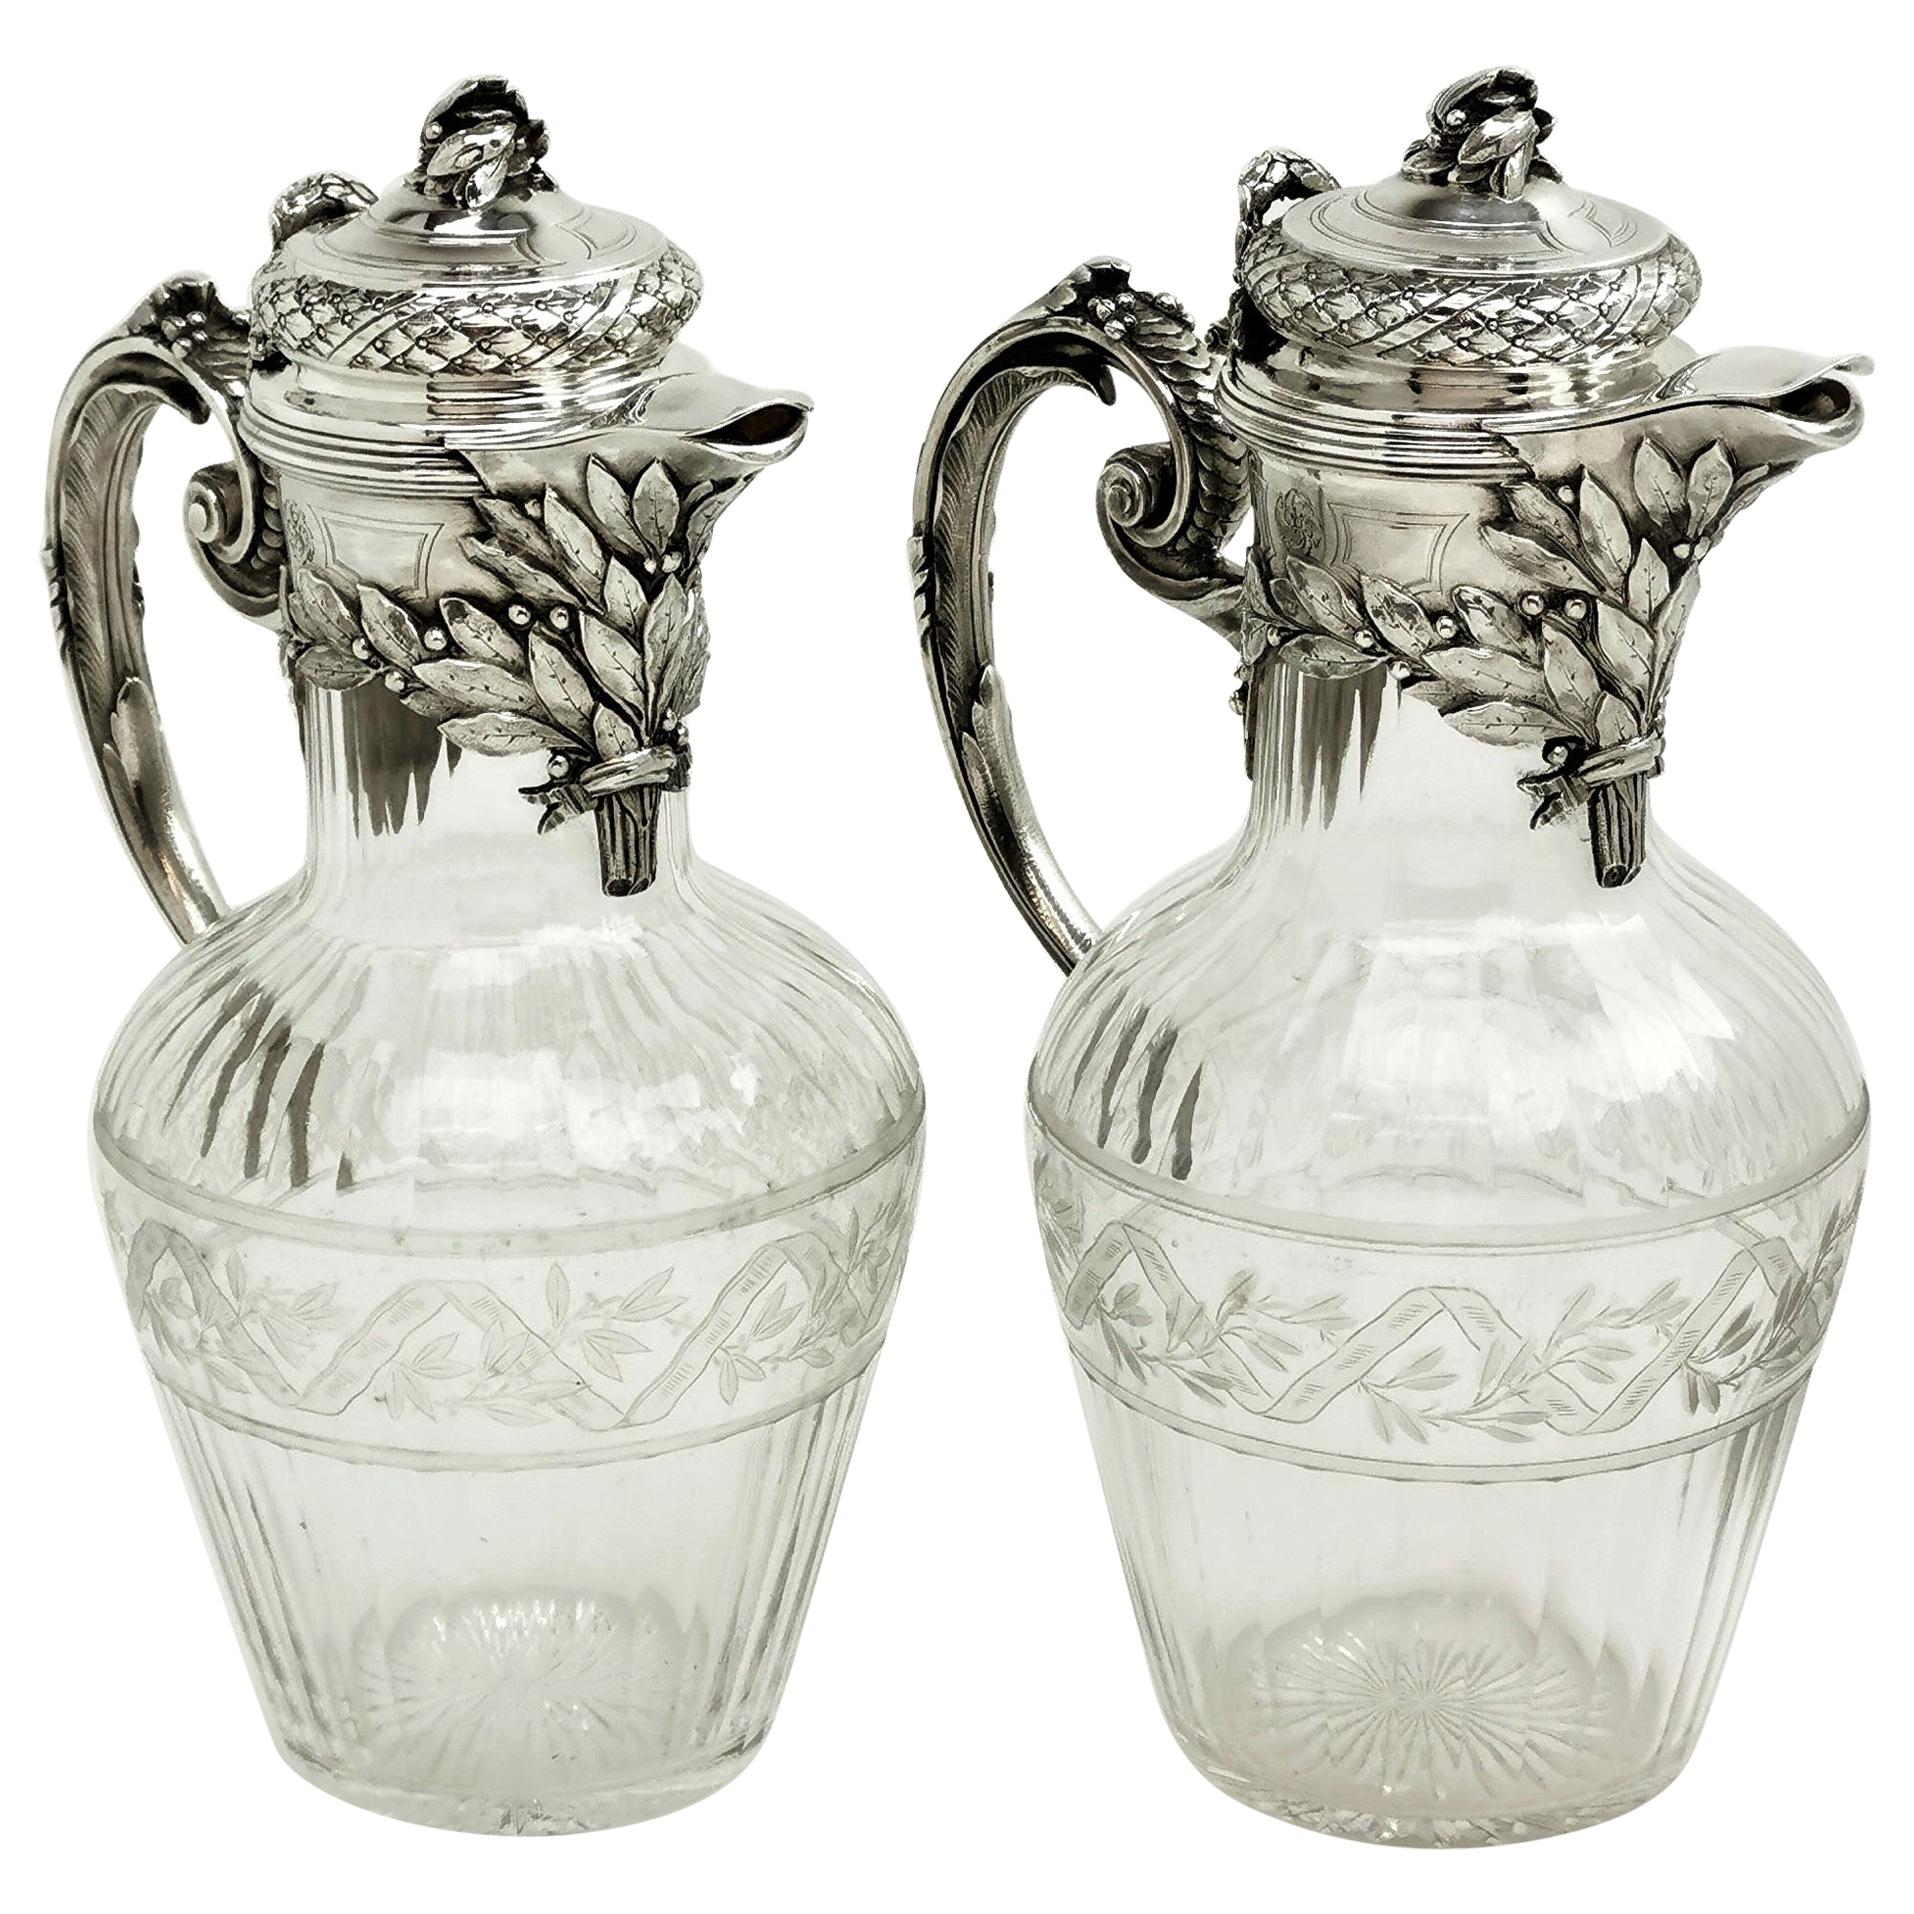 Pair of French Silver and Cut Glass Claret Jug / Wine Decanter Paris, circa 1880